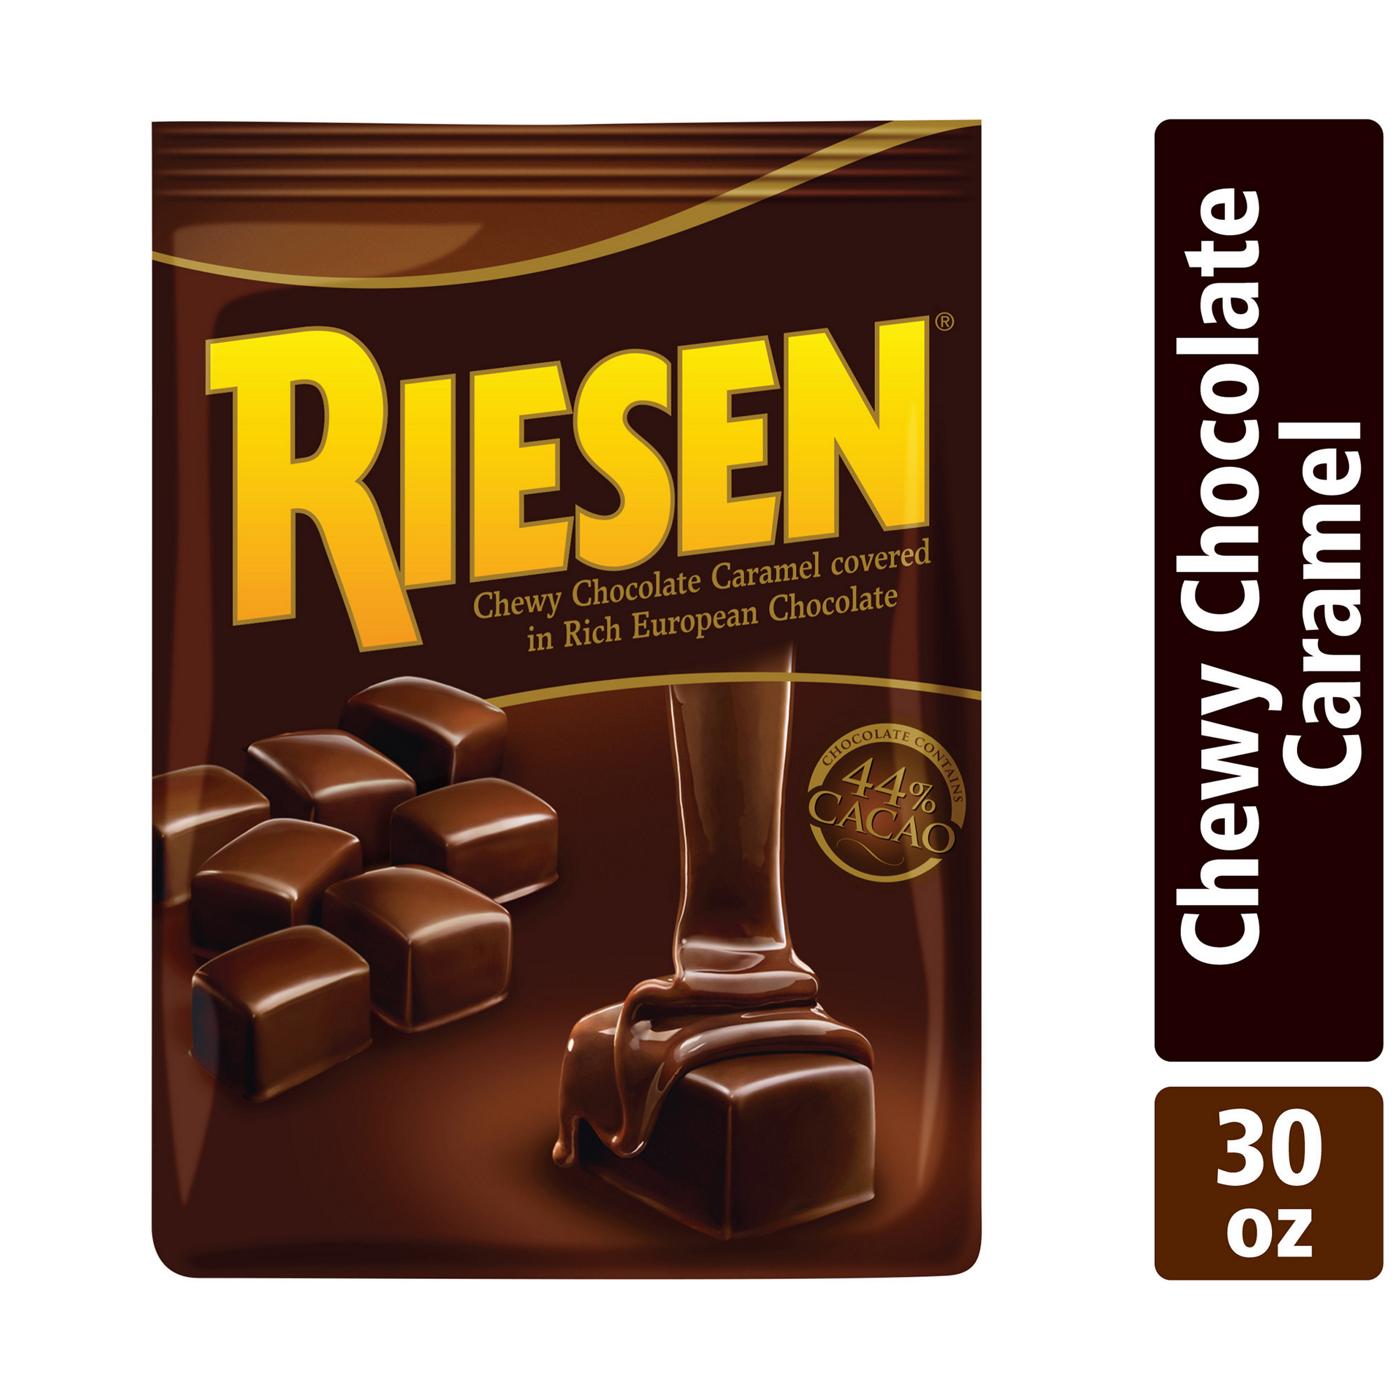 Riesen Chocolate Covered Chewy Caramel Candy; image 3 of 6